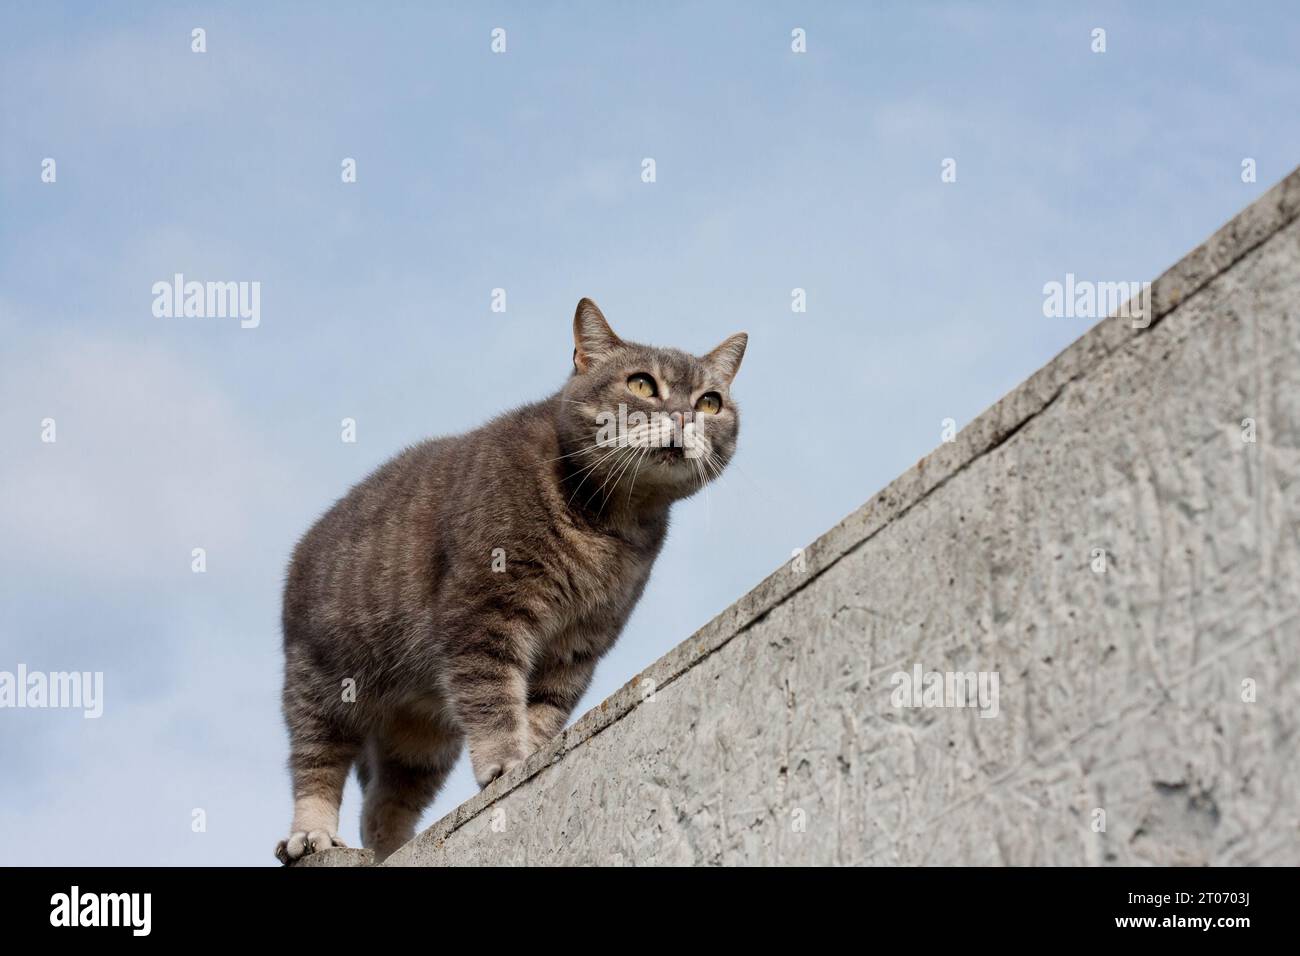 gray tabby cat with yellow eyes standing on concrete fence, blue sky background. beautiful fluffy cat walking along fence, carefully looking ahead. Ou Stock Photo